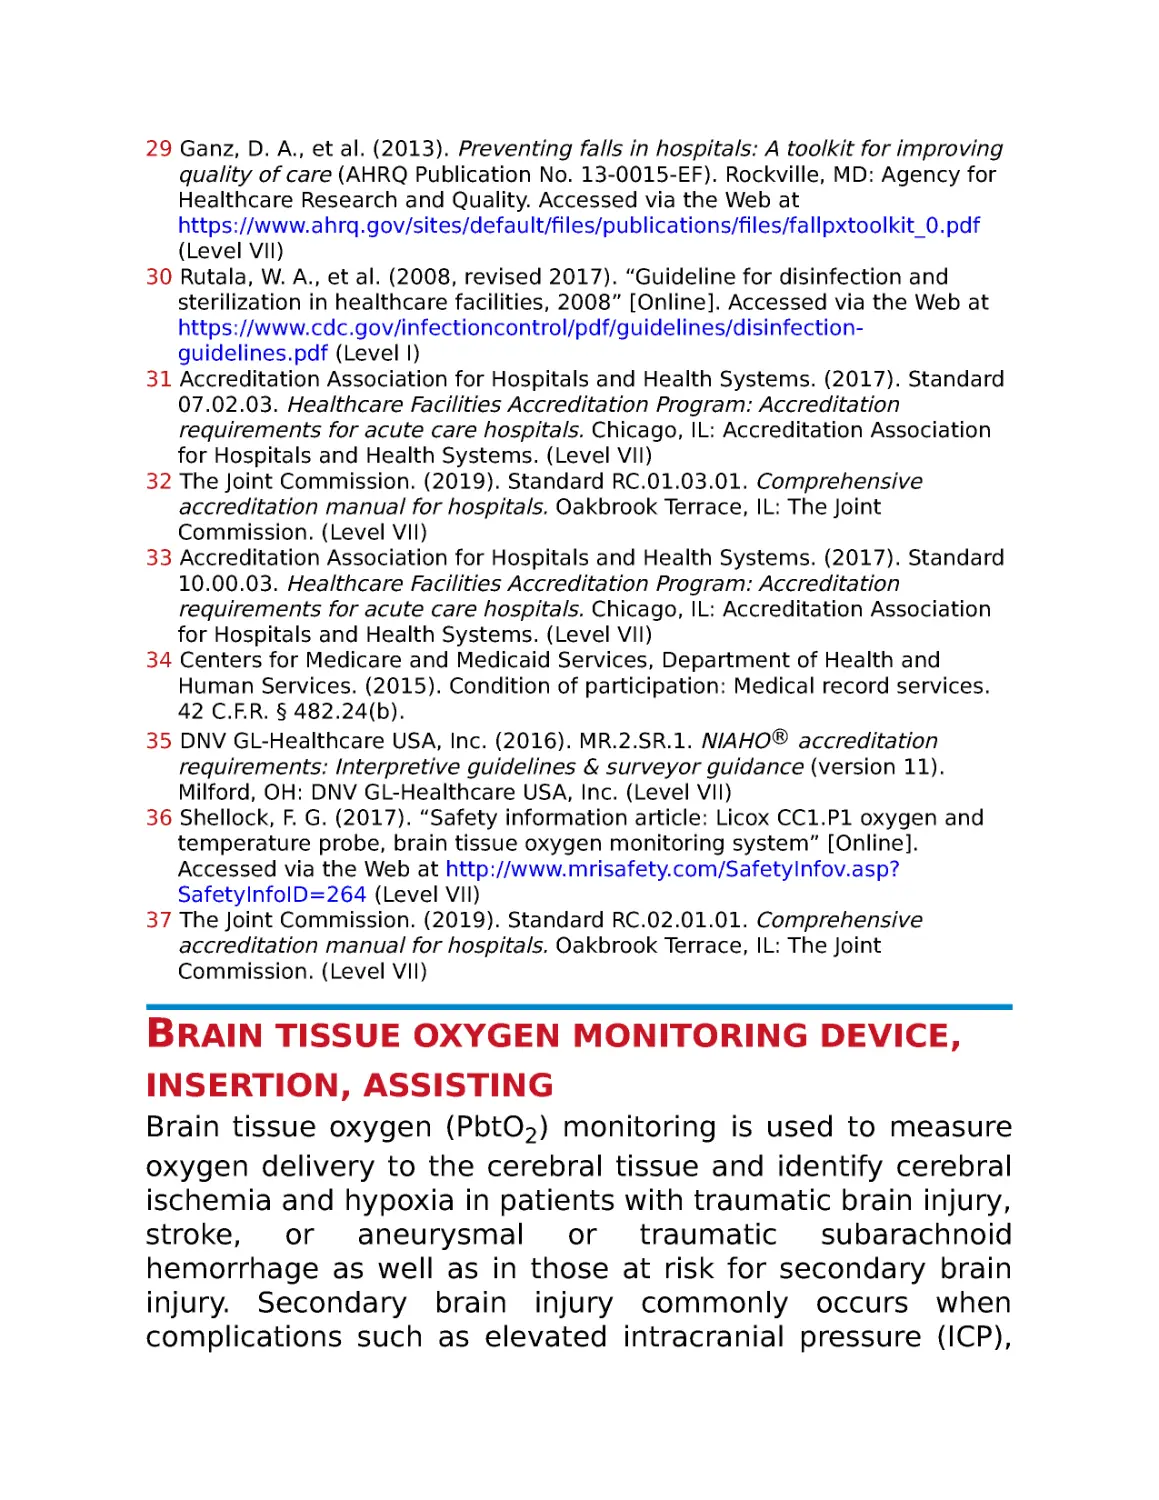 Brain tissue oxygen monitoring device, insertion, assisting